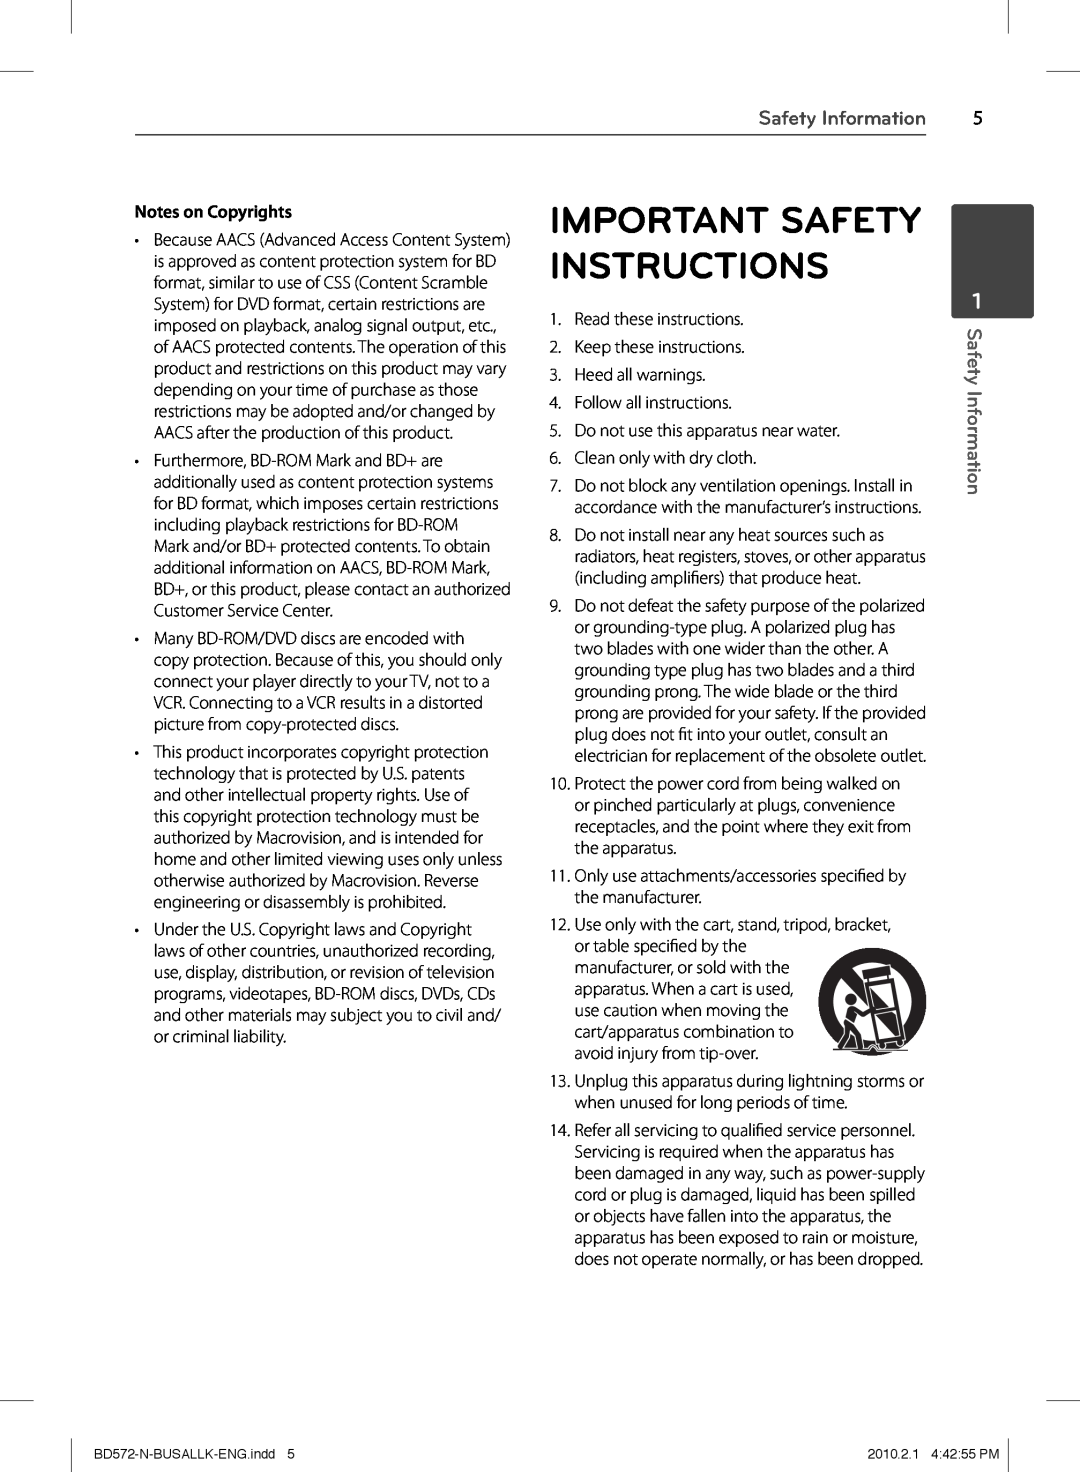 LG Electronics BD570 owner manual Important Safety Instructions, Safety Information, Notes on Copyrights 